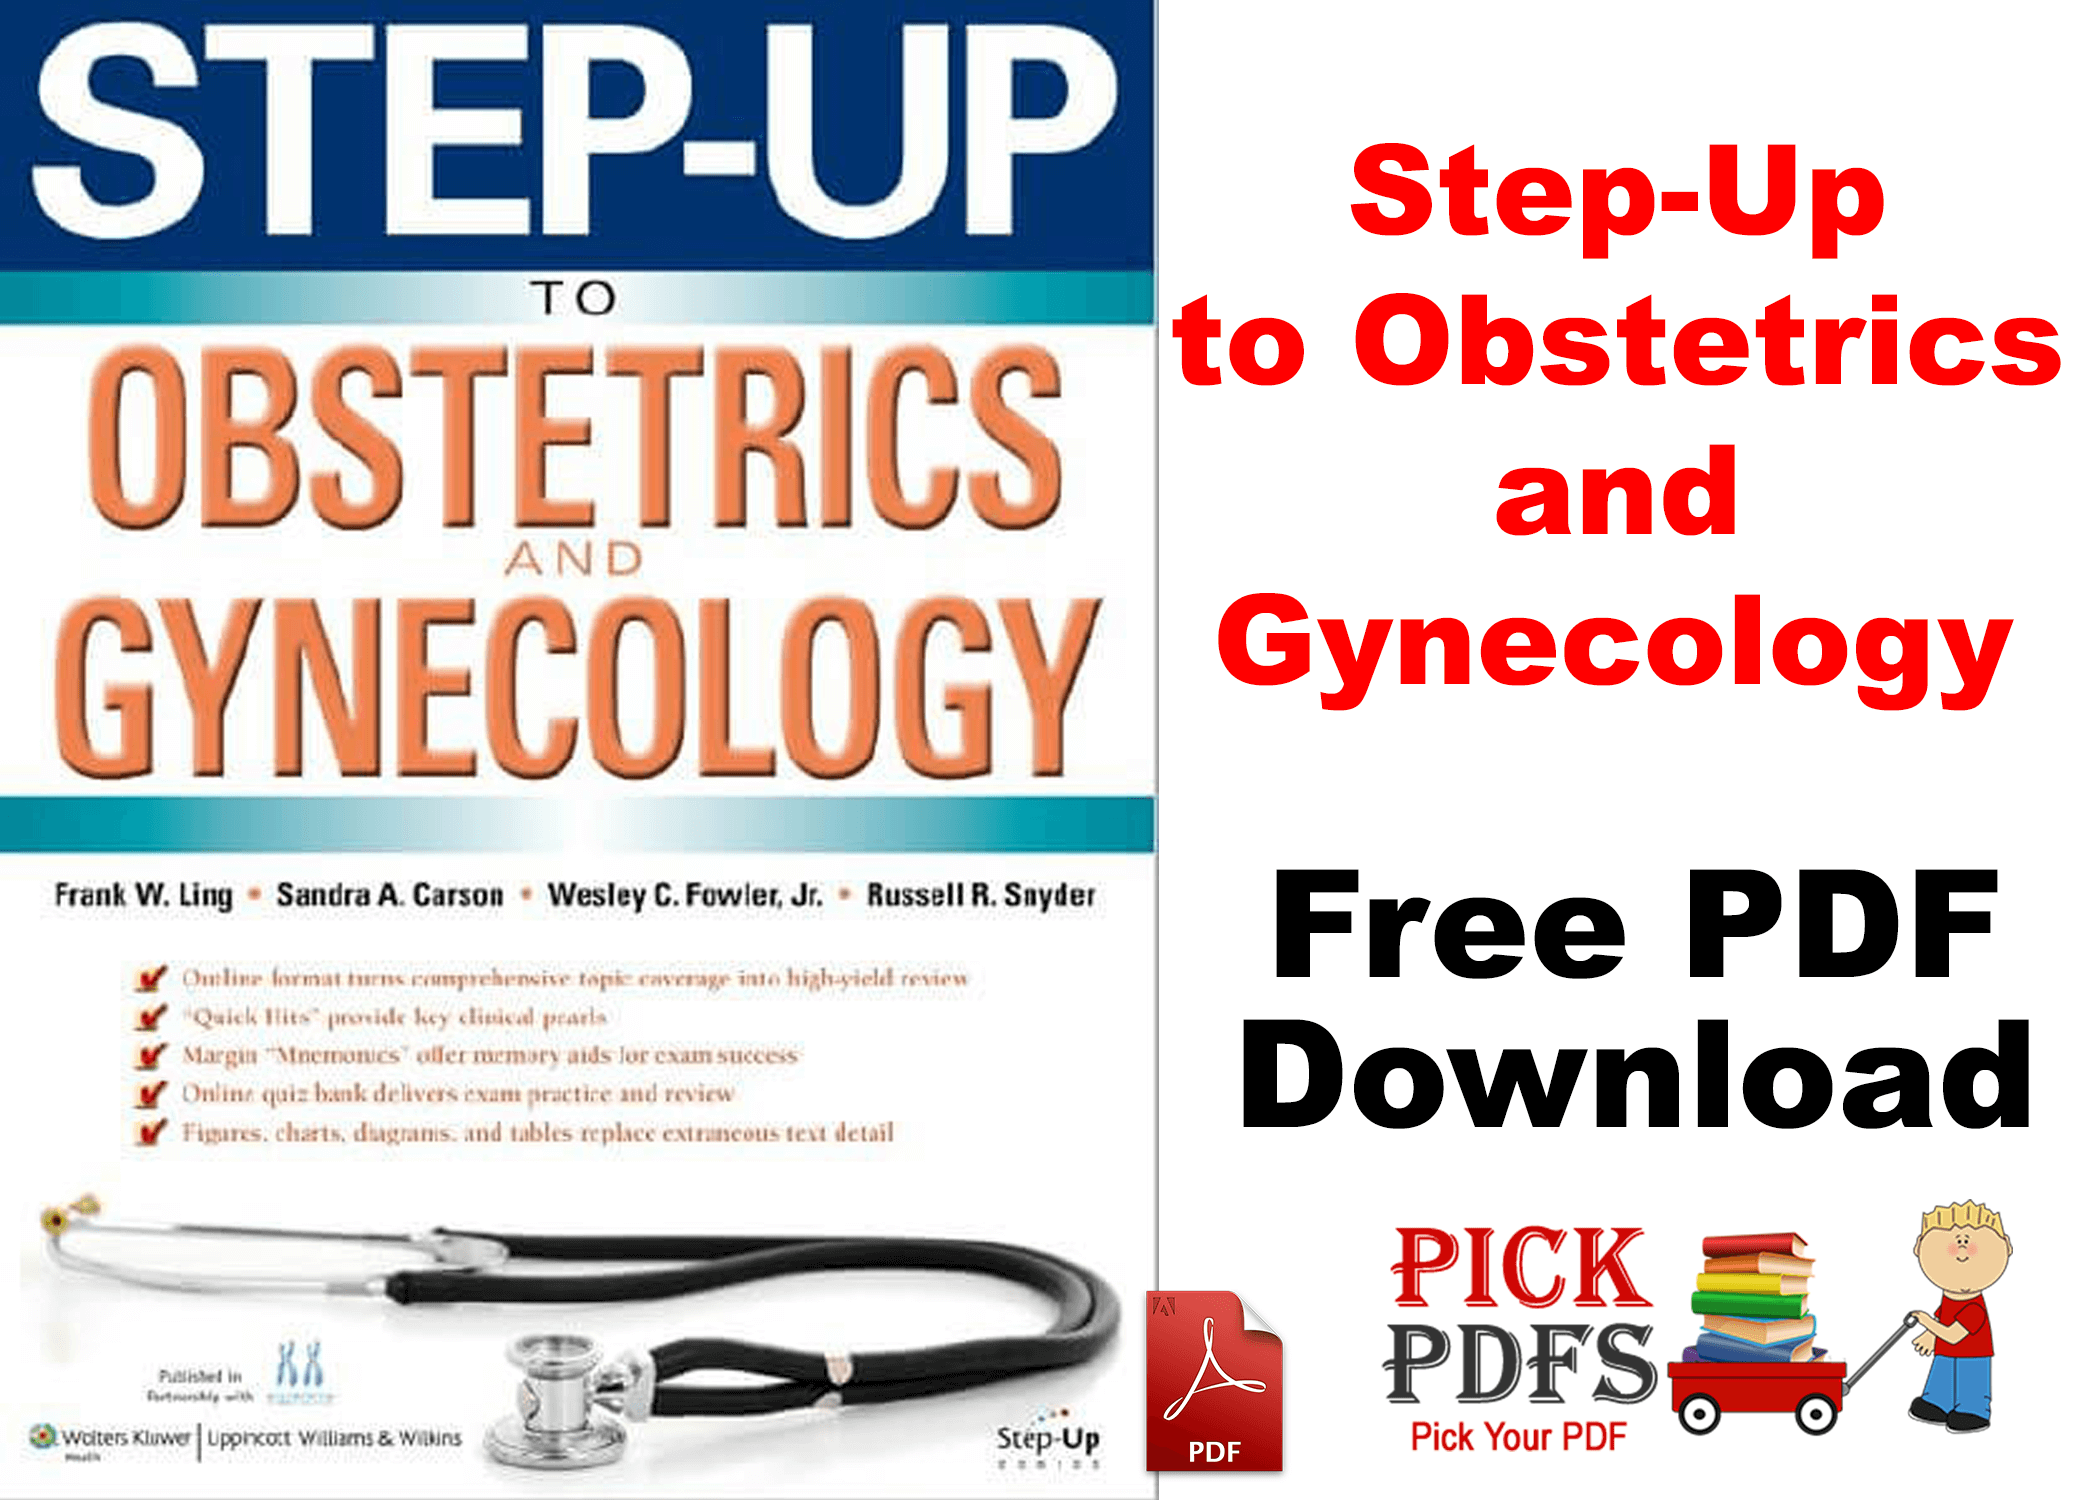 https://pickpdfs.com/step-up-to-obstetrics-and-gynecology-free-pdf-download-direct-link/